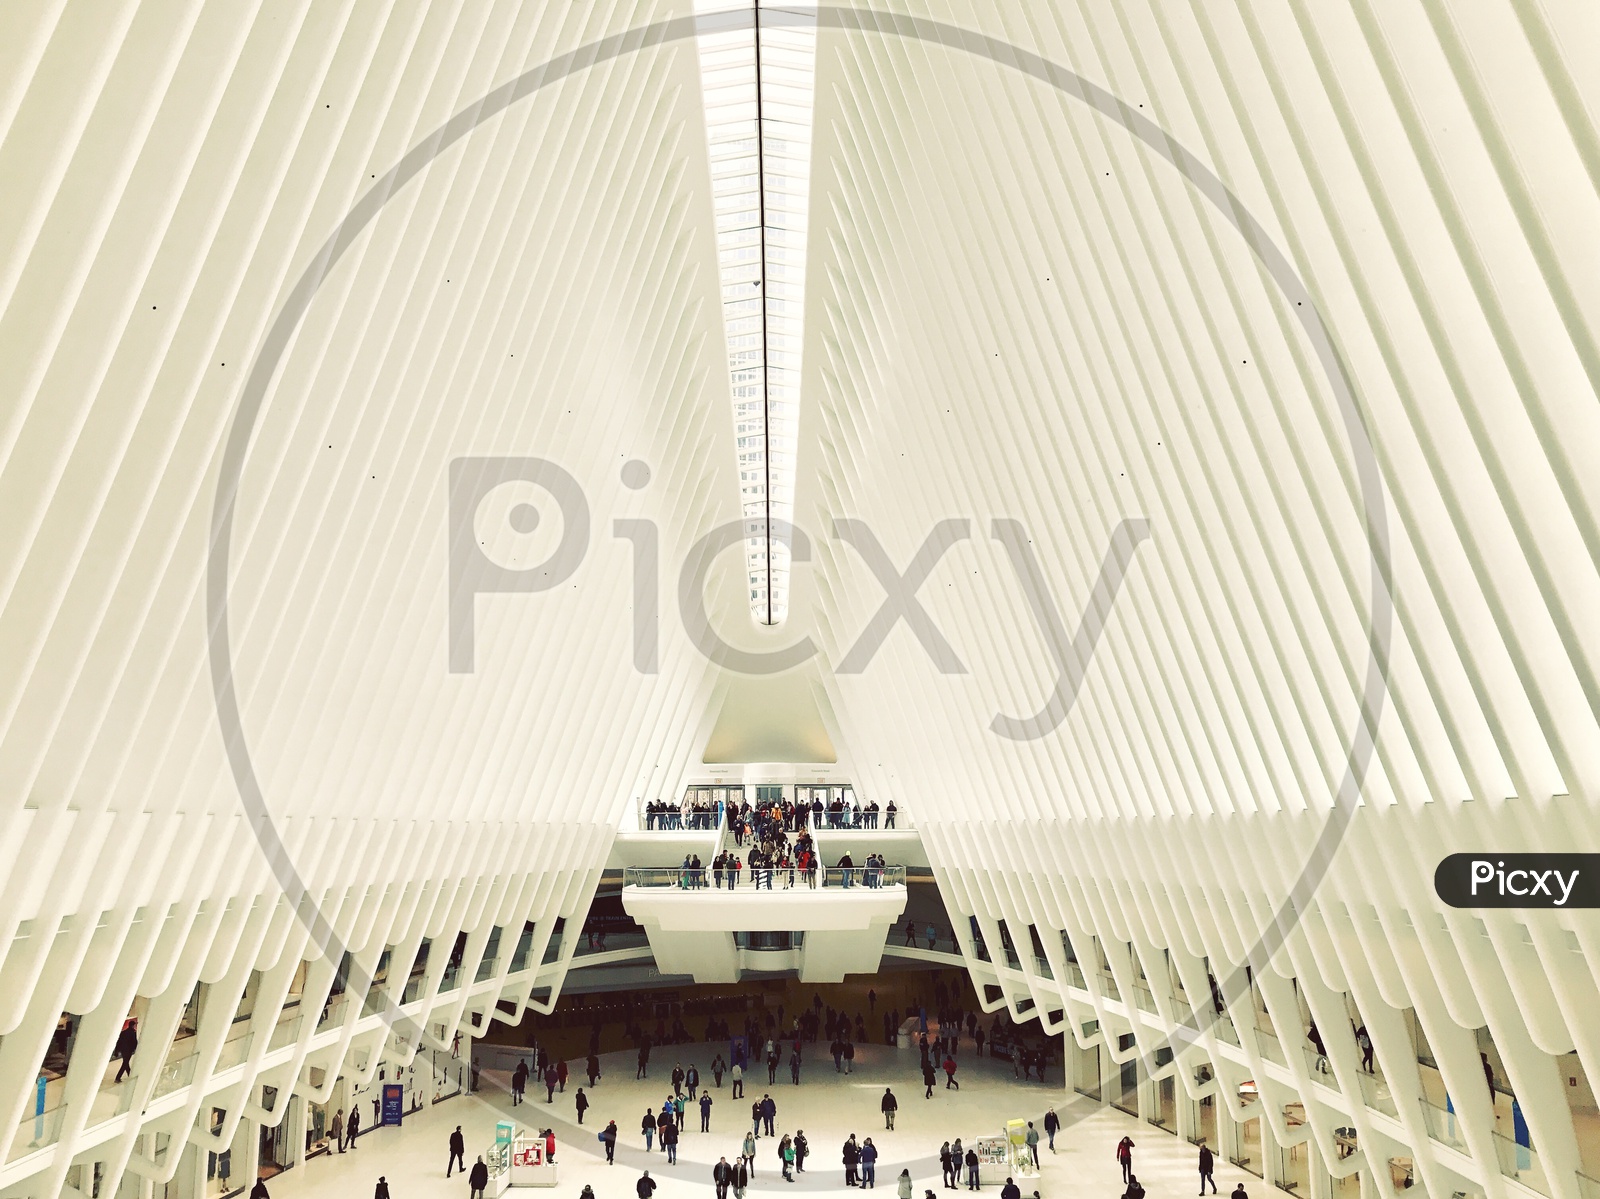 The Oculus at the World Trade Center Transportation Hub in New York City